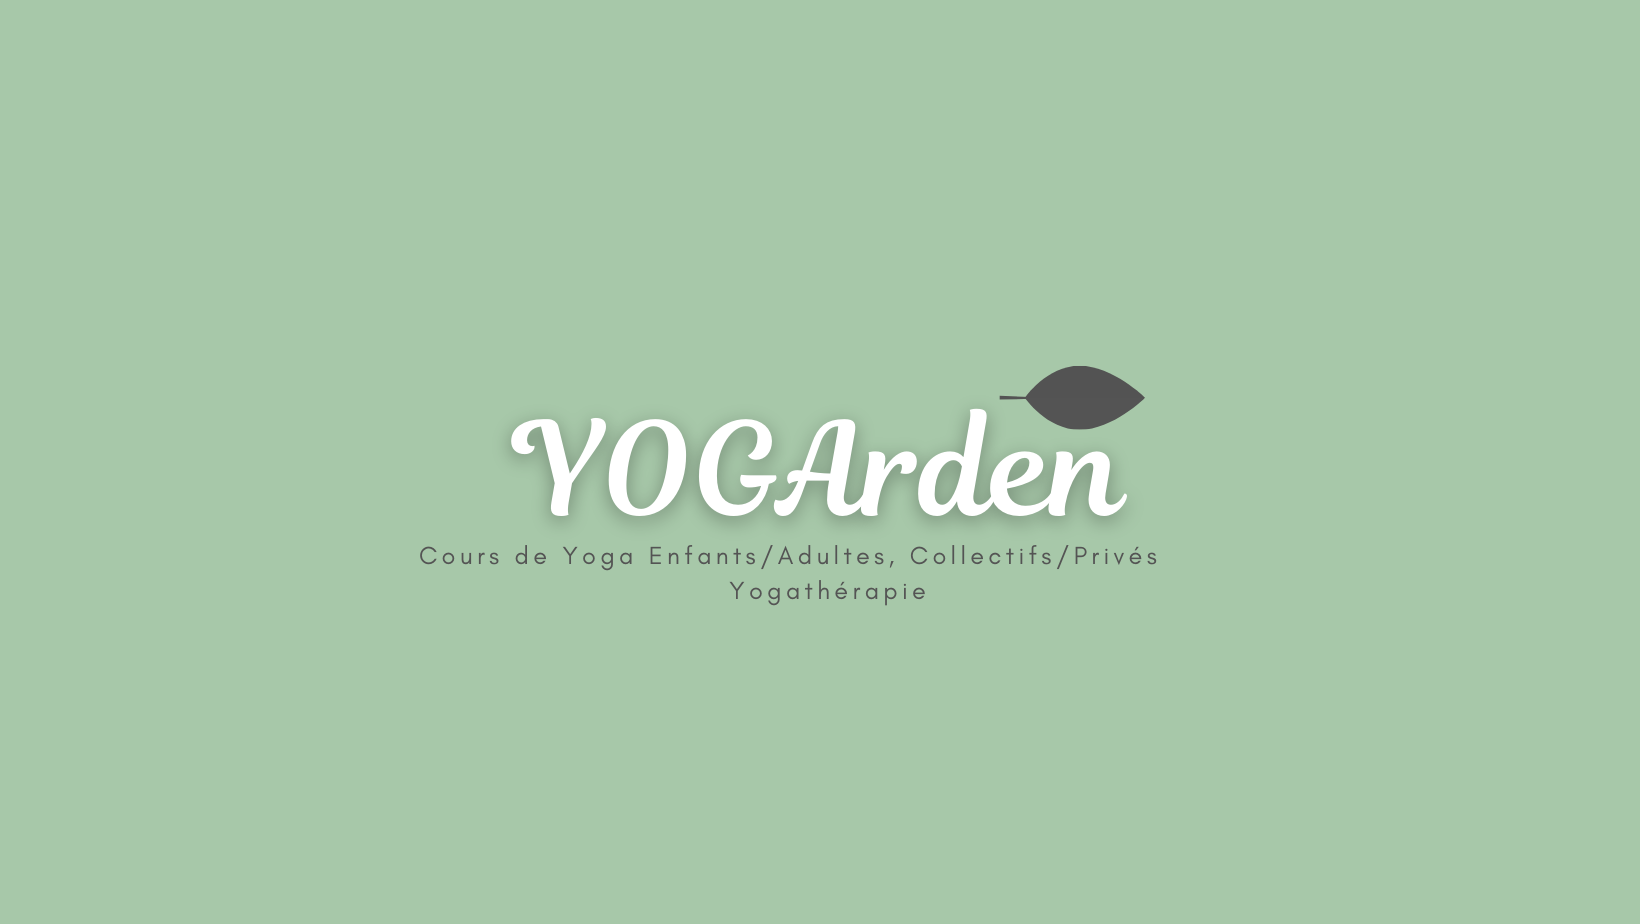 YOGArden canva format png.png